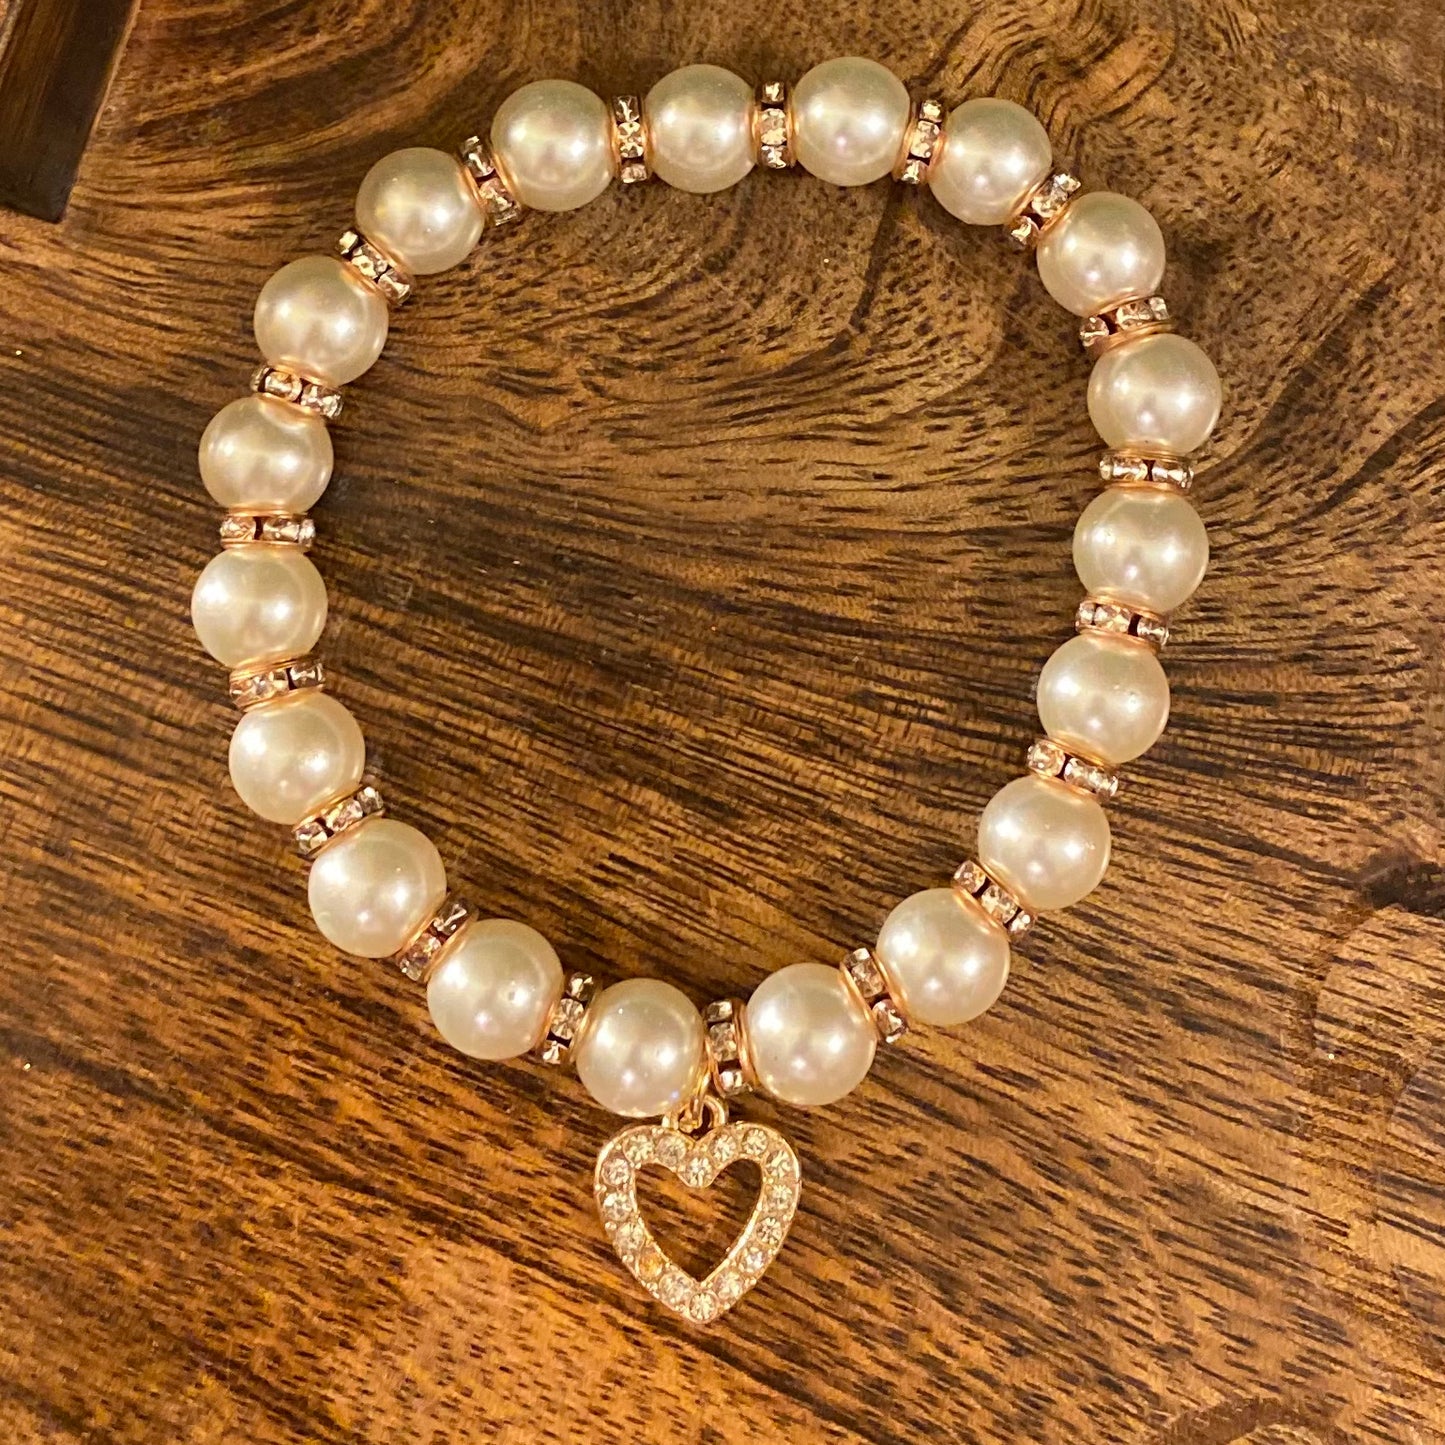 Pearl and Rhinestone Stretch Bracelet With Gold Heart Charm